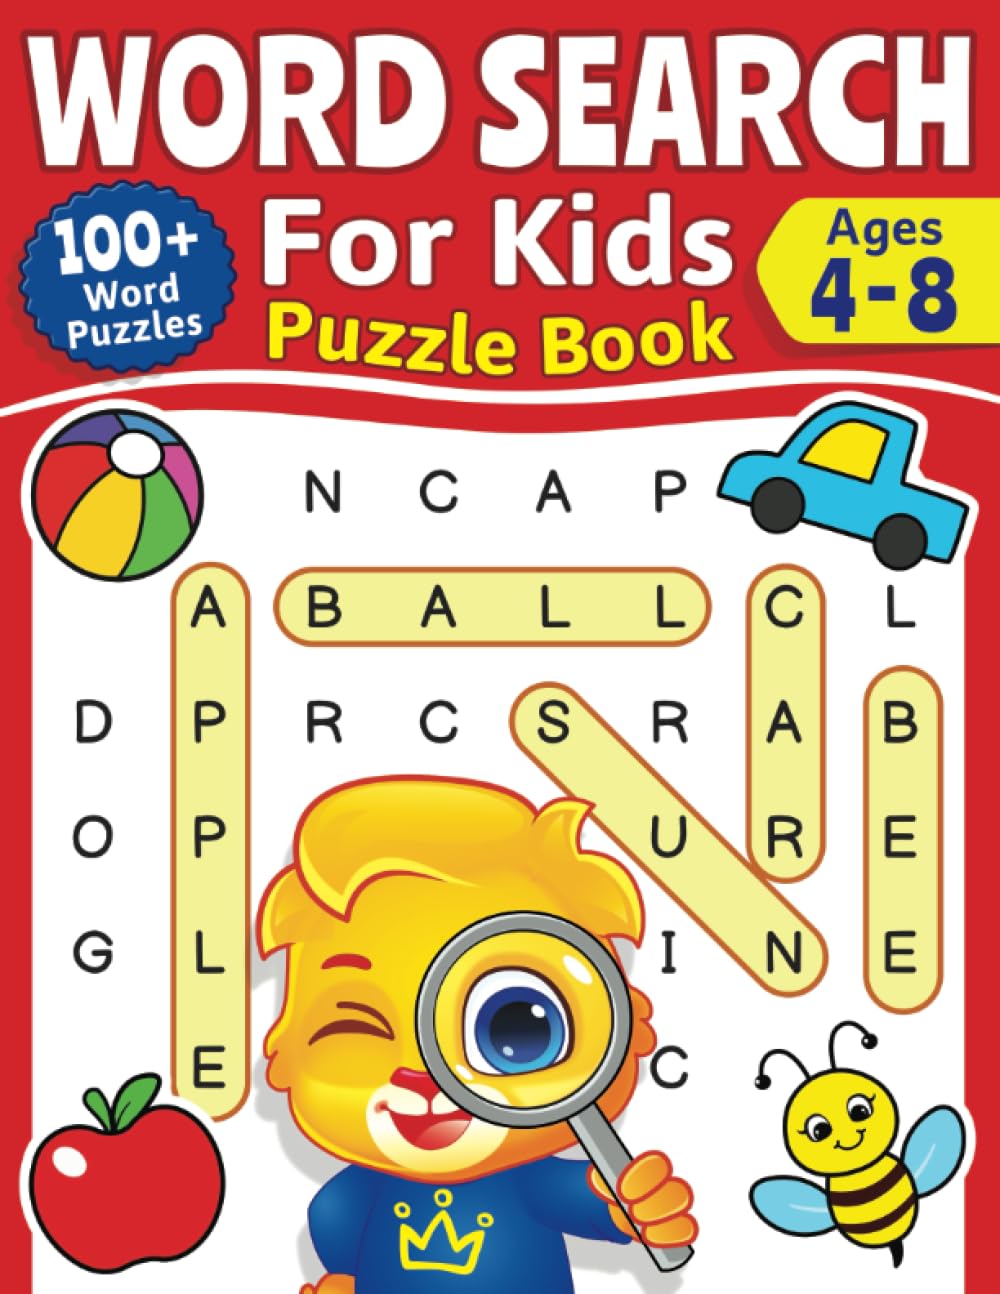 Word Search For Kids Puzzle Book: 100+ Word Puzzles | Fun Challenges For Children Ages 4-8 | Search and Find Words Activity Book With Multiple Levels Of Difficulty